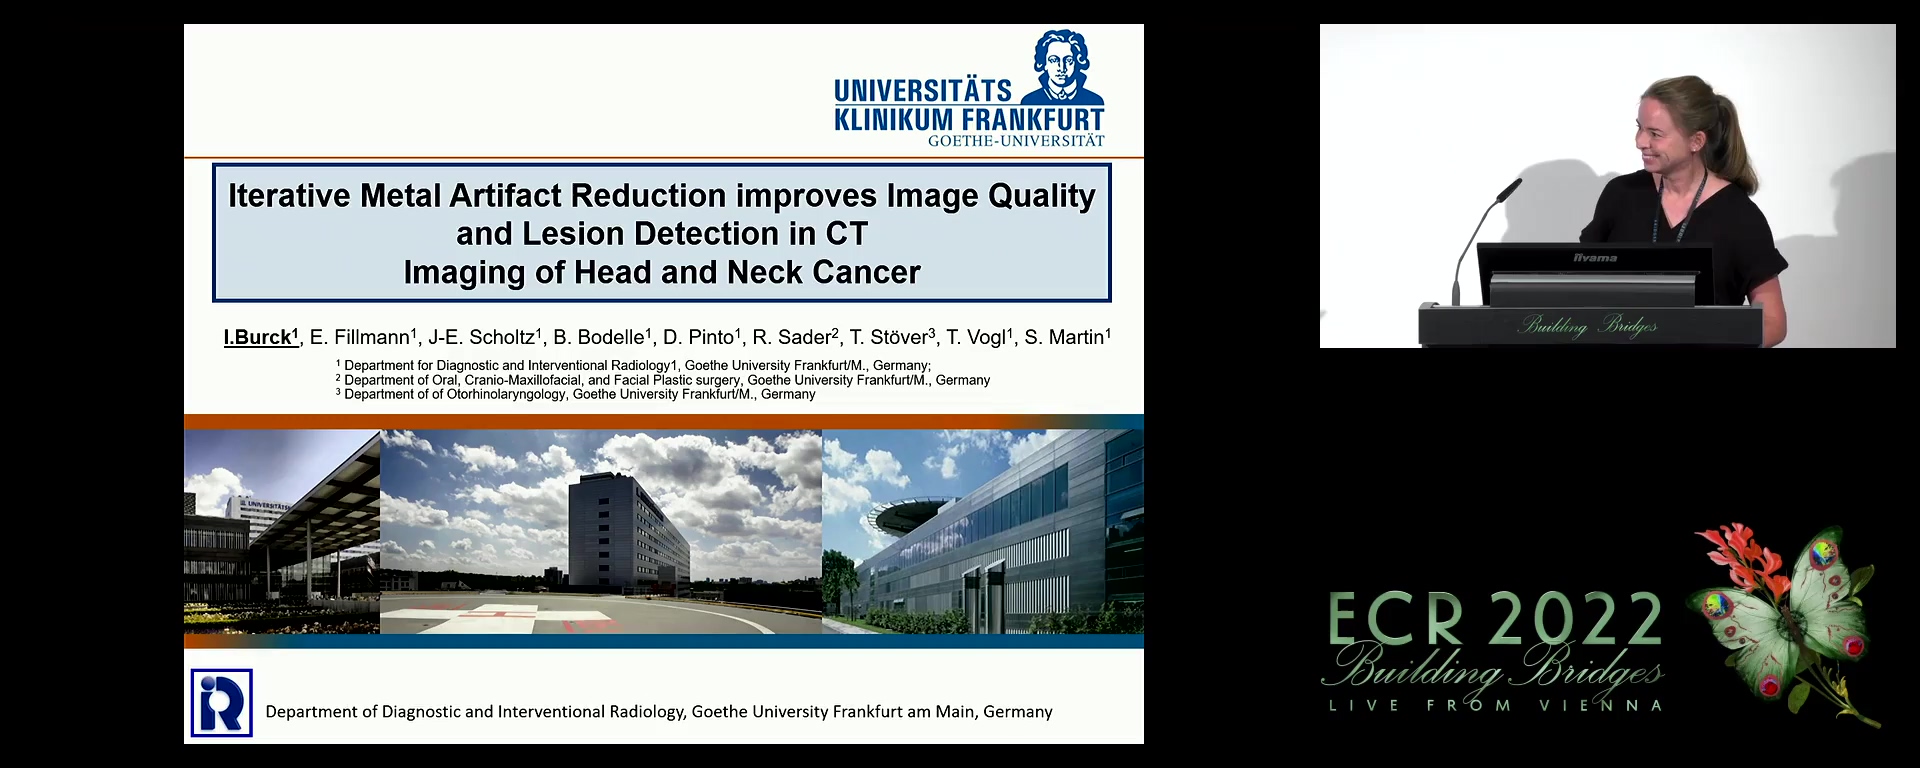 Iterative metal artifact reduction improves image quality and lesion detection in CT imaging of head and neck cancer